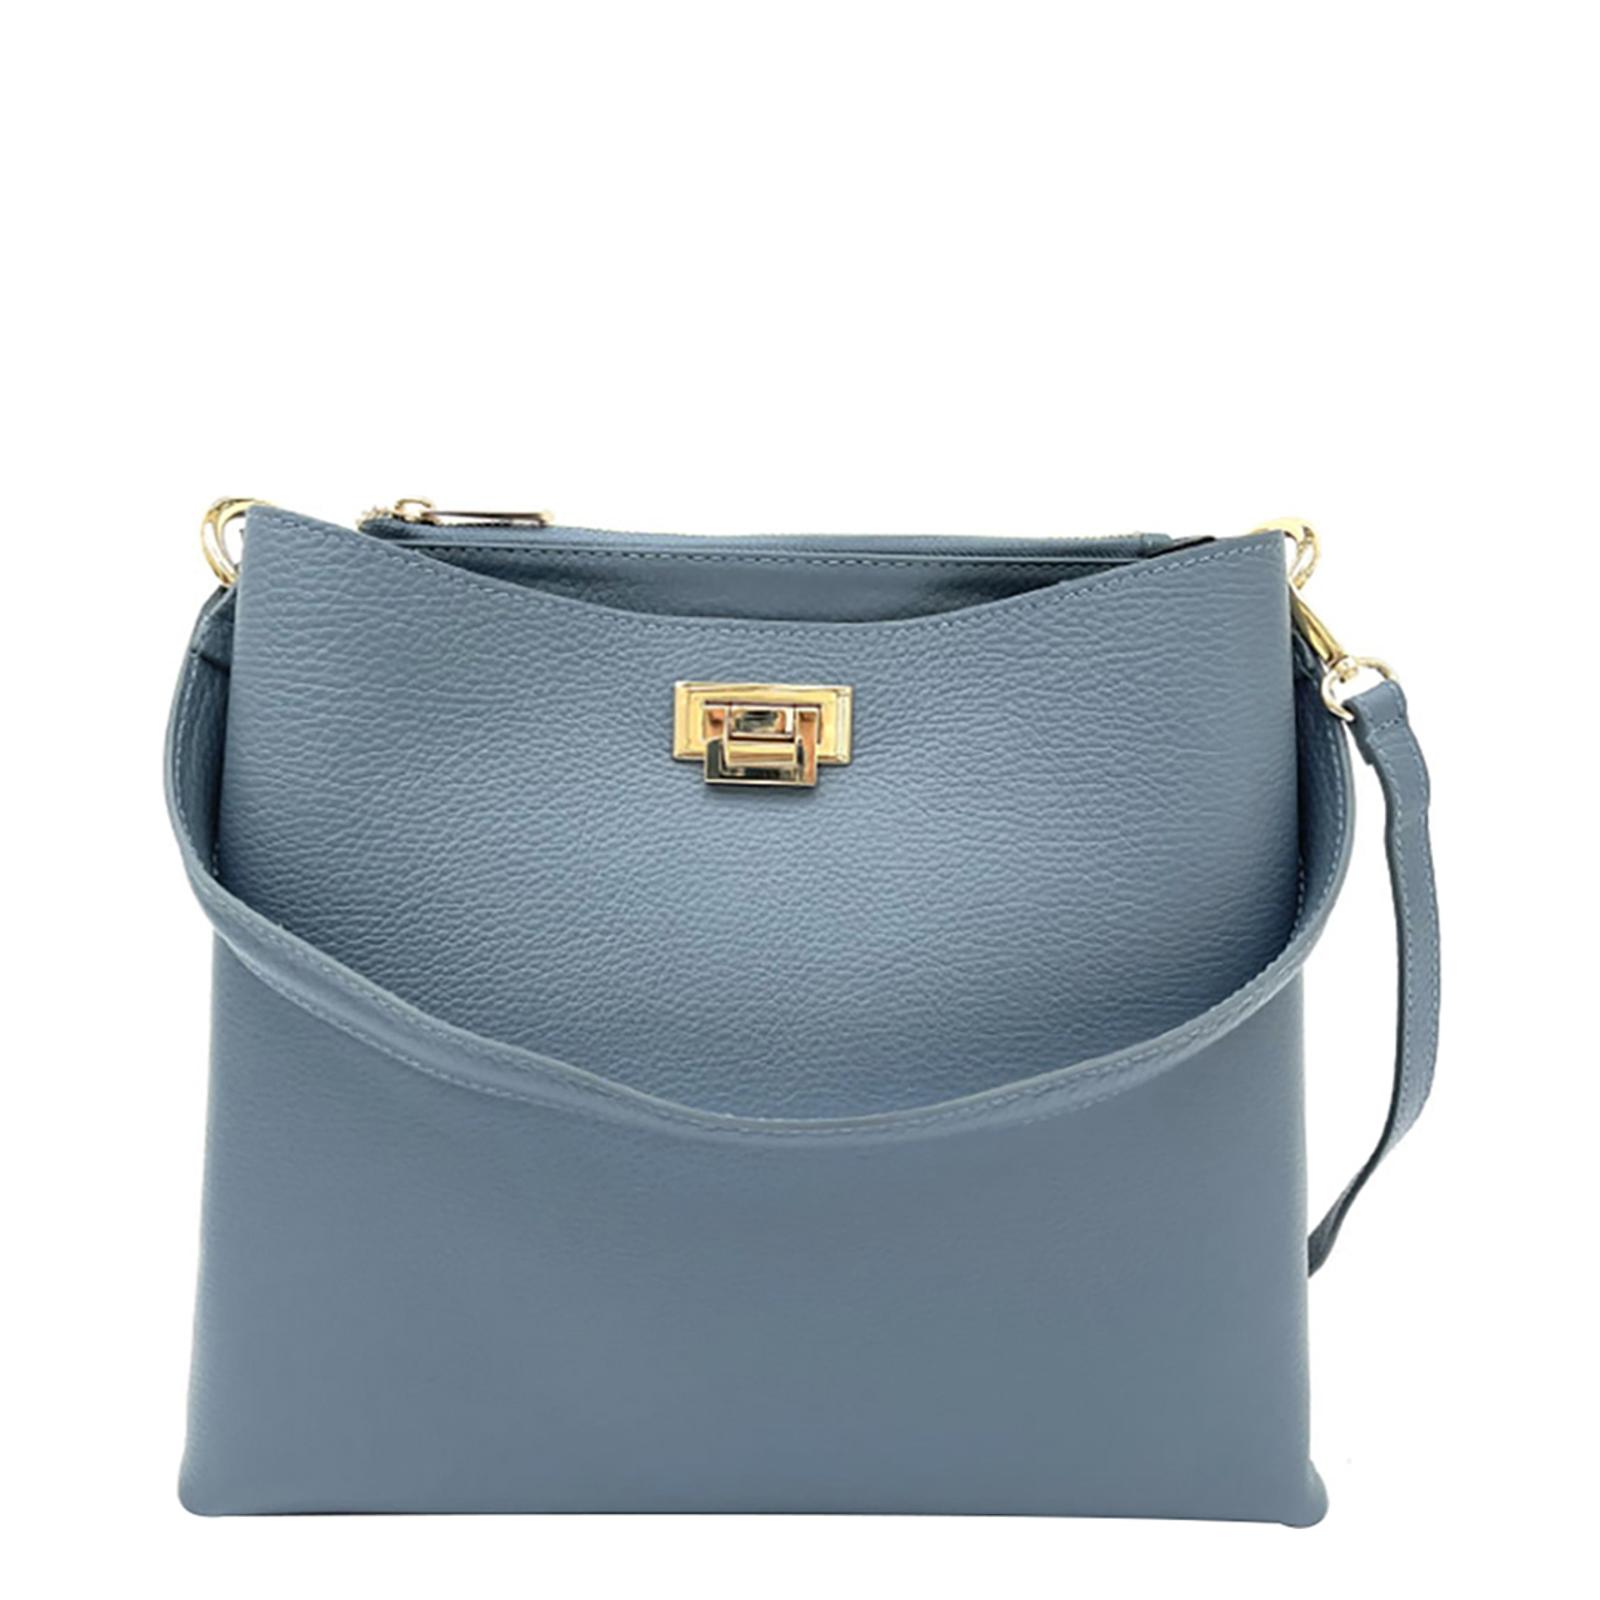 Denim Blue The Caton Leather Tote Bag - BrandAlley